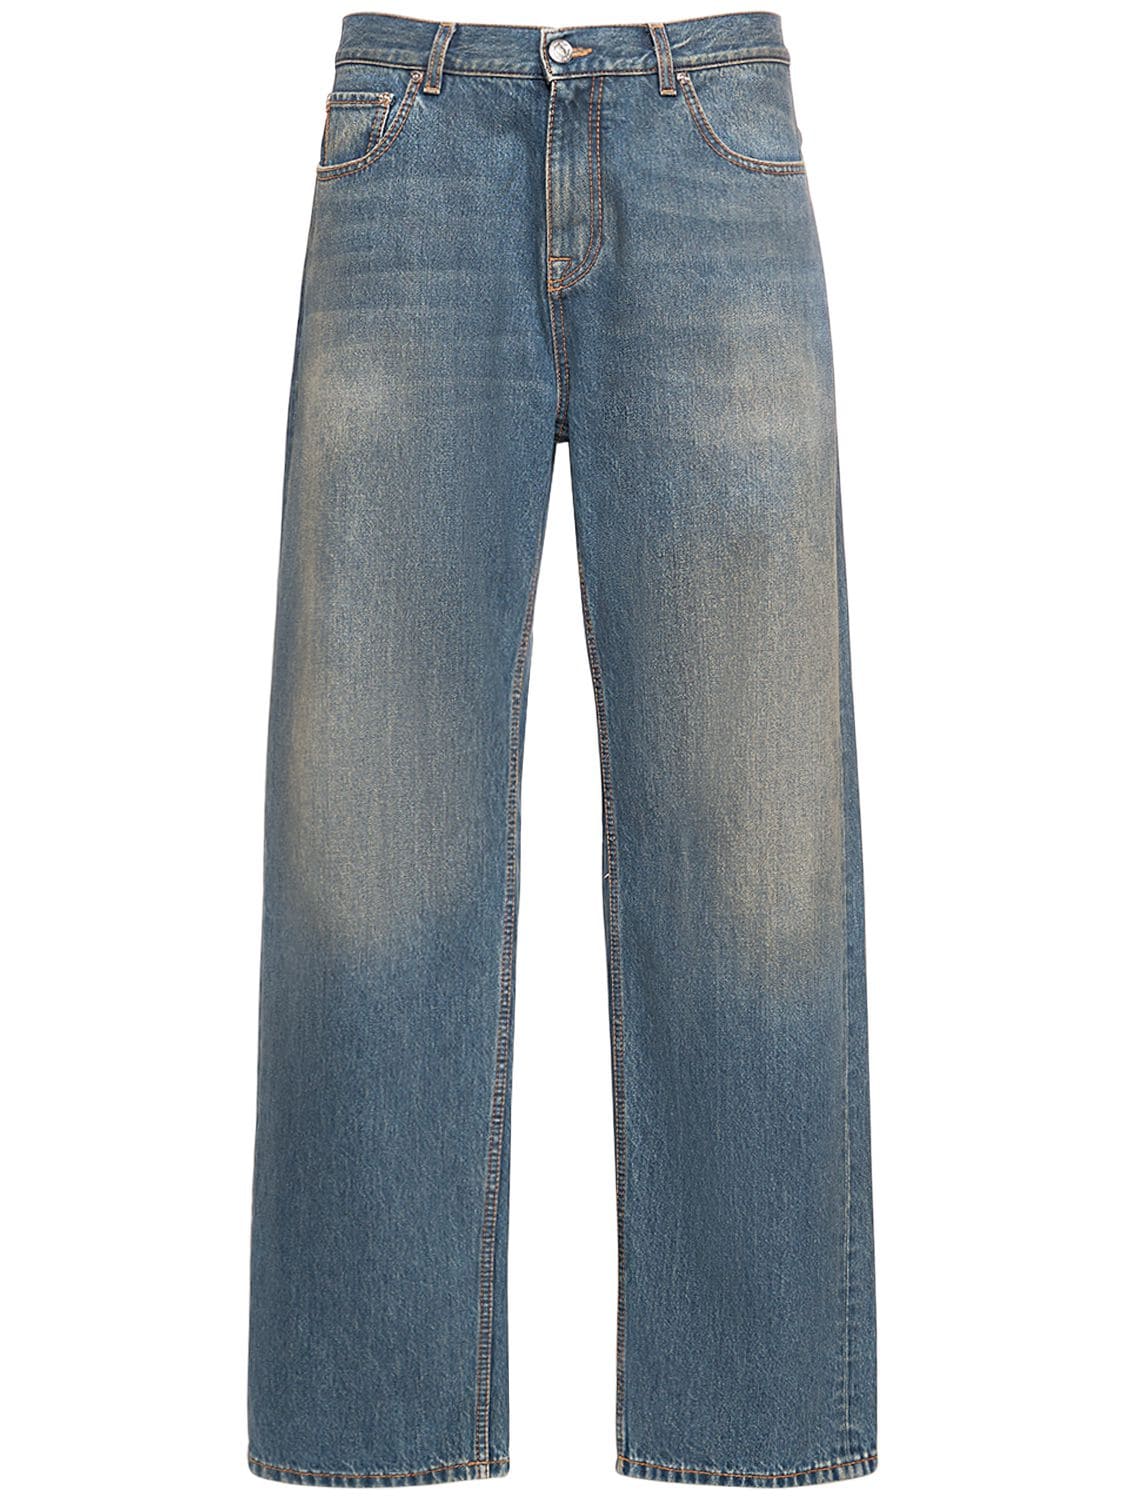 Image of Faded Cotton Denim Jeans